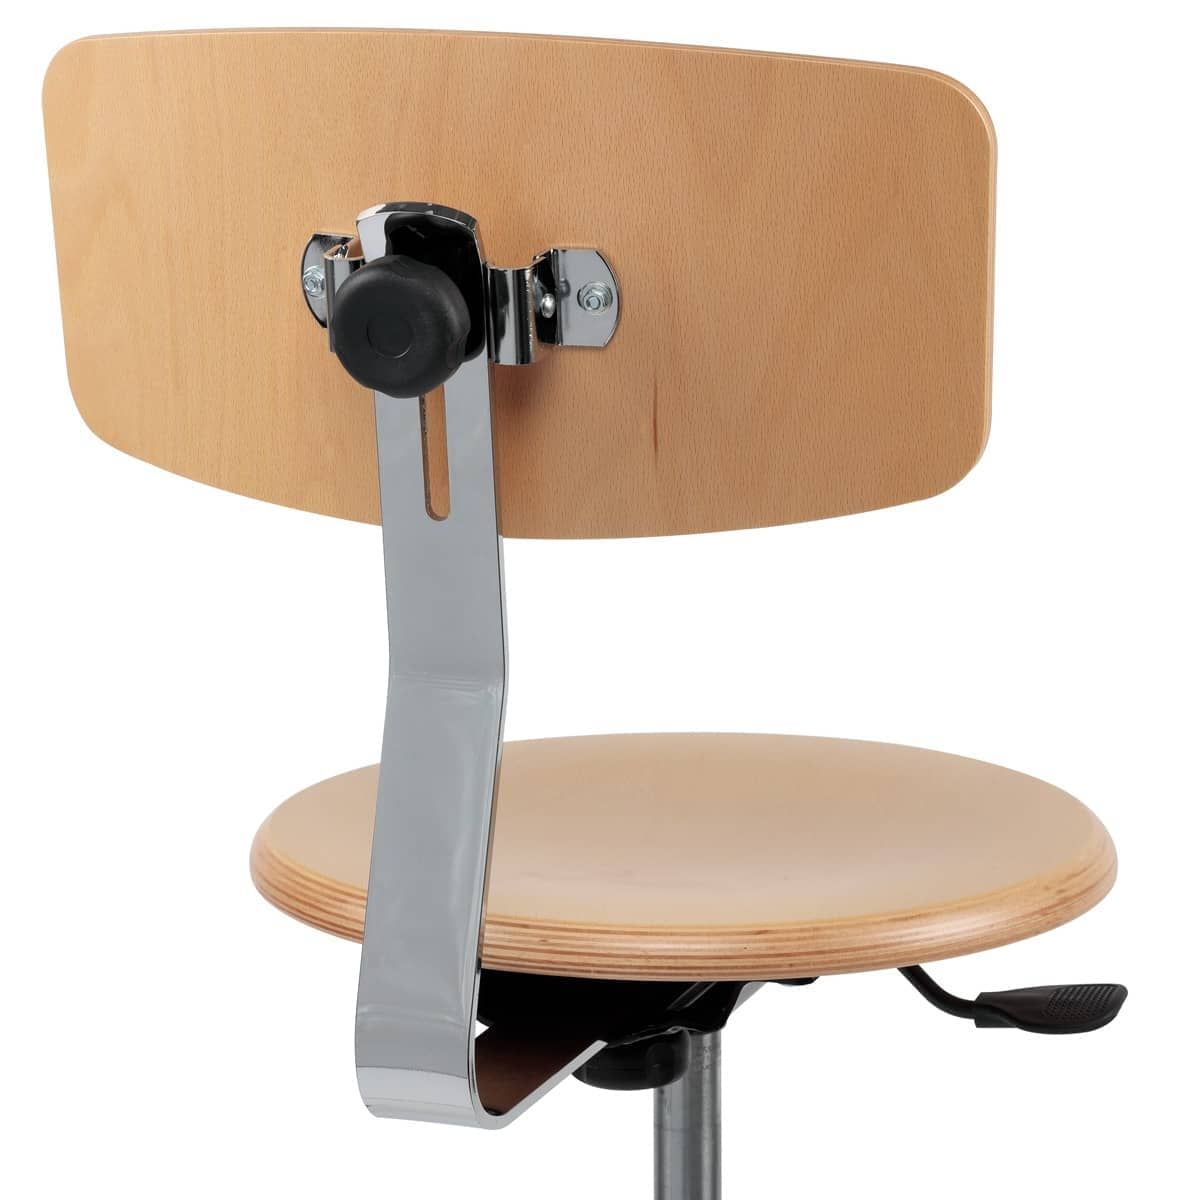 Perfect for studios where multiple workspaces have height differences